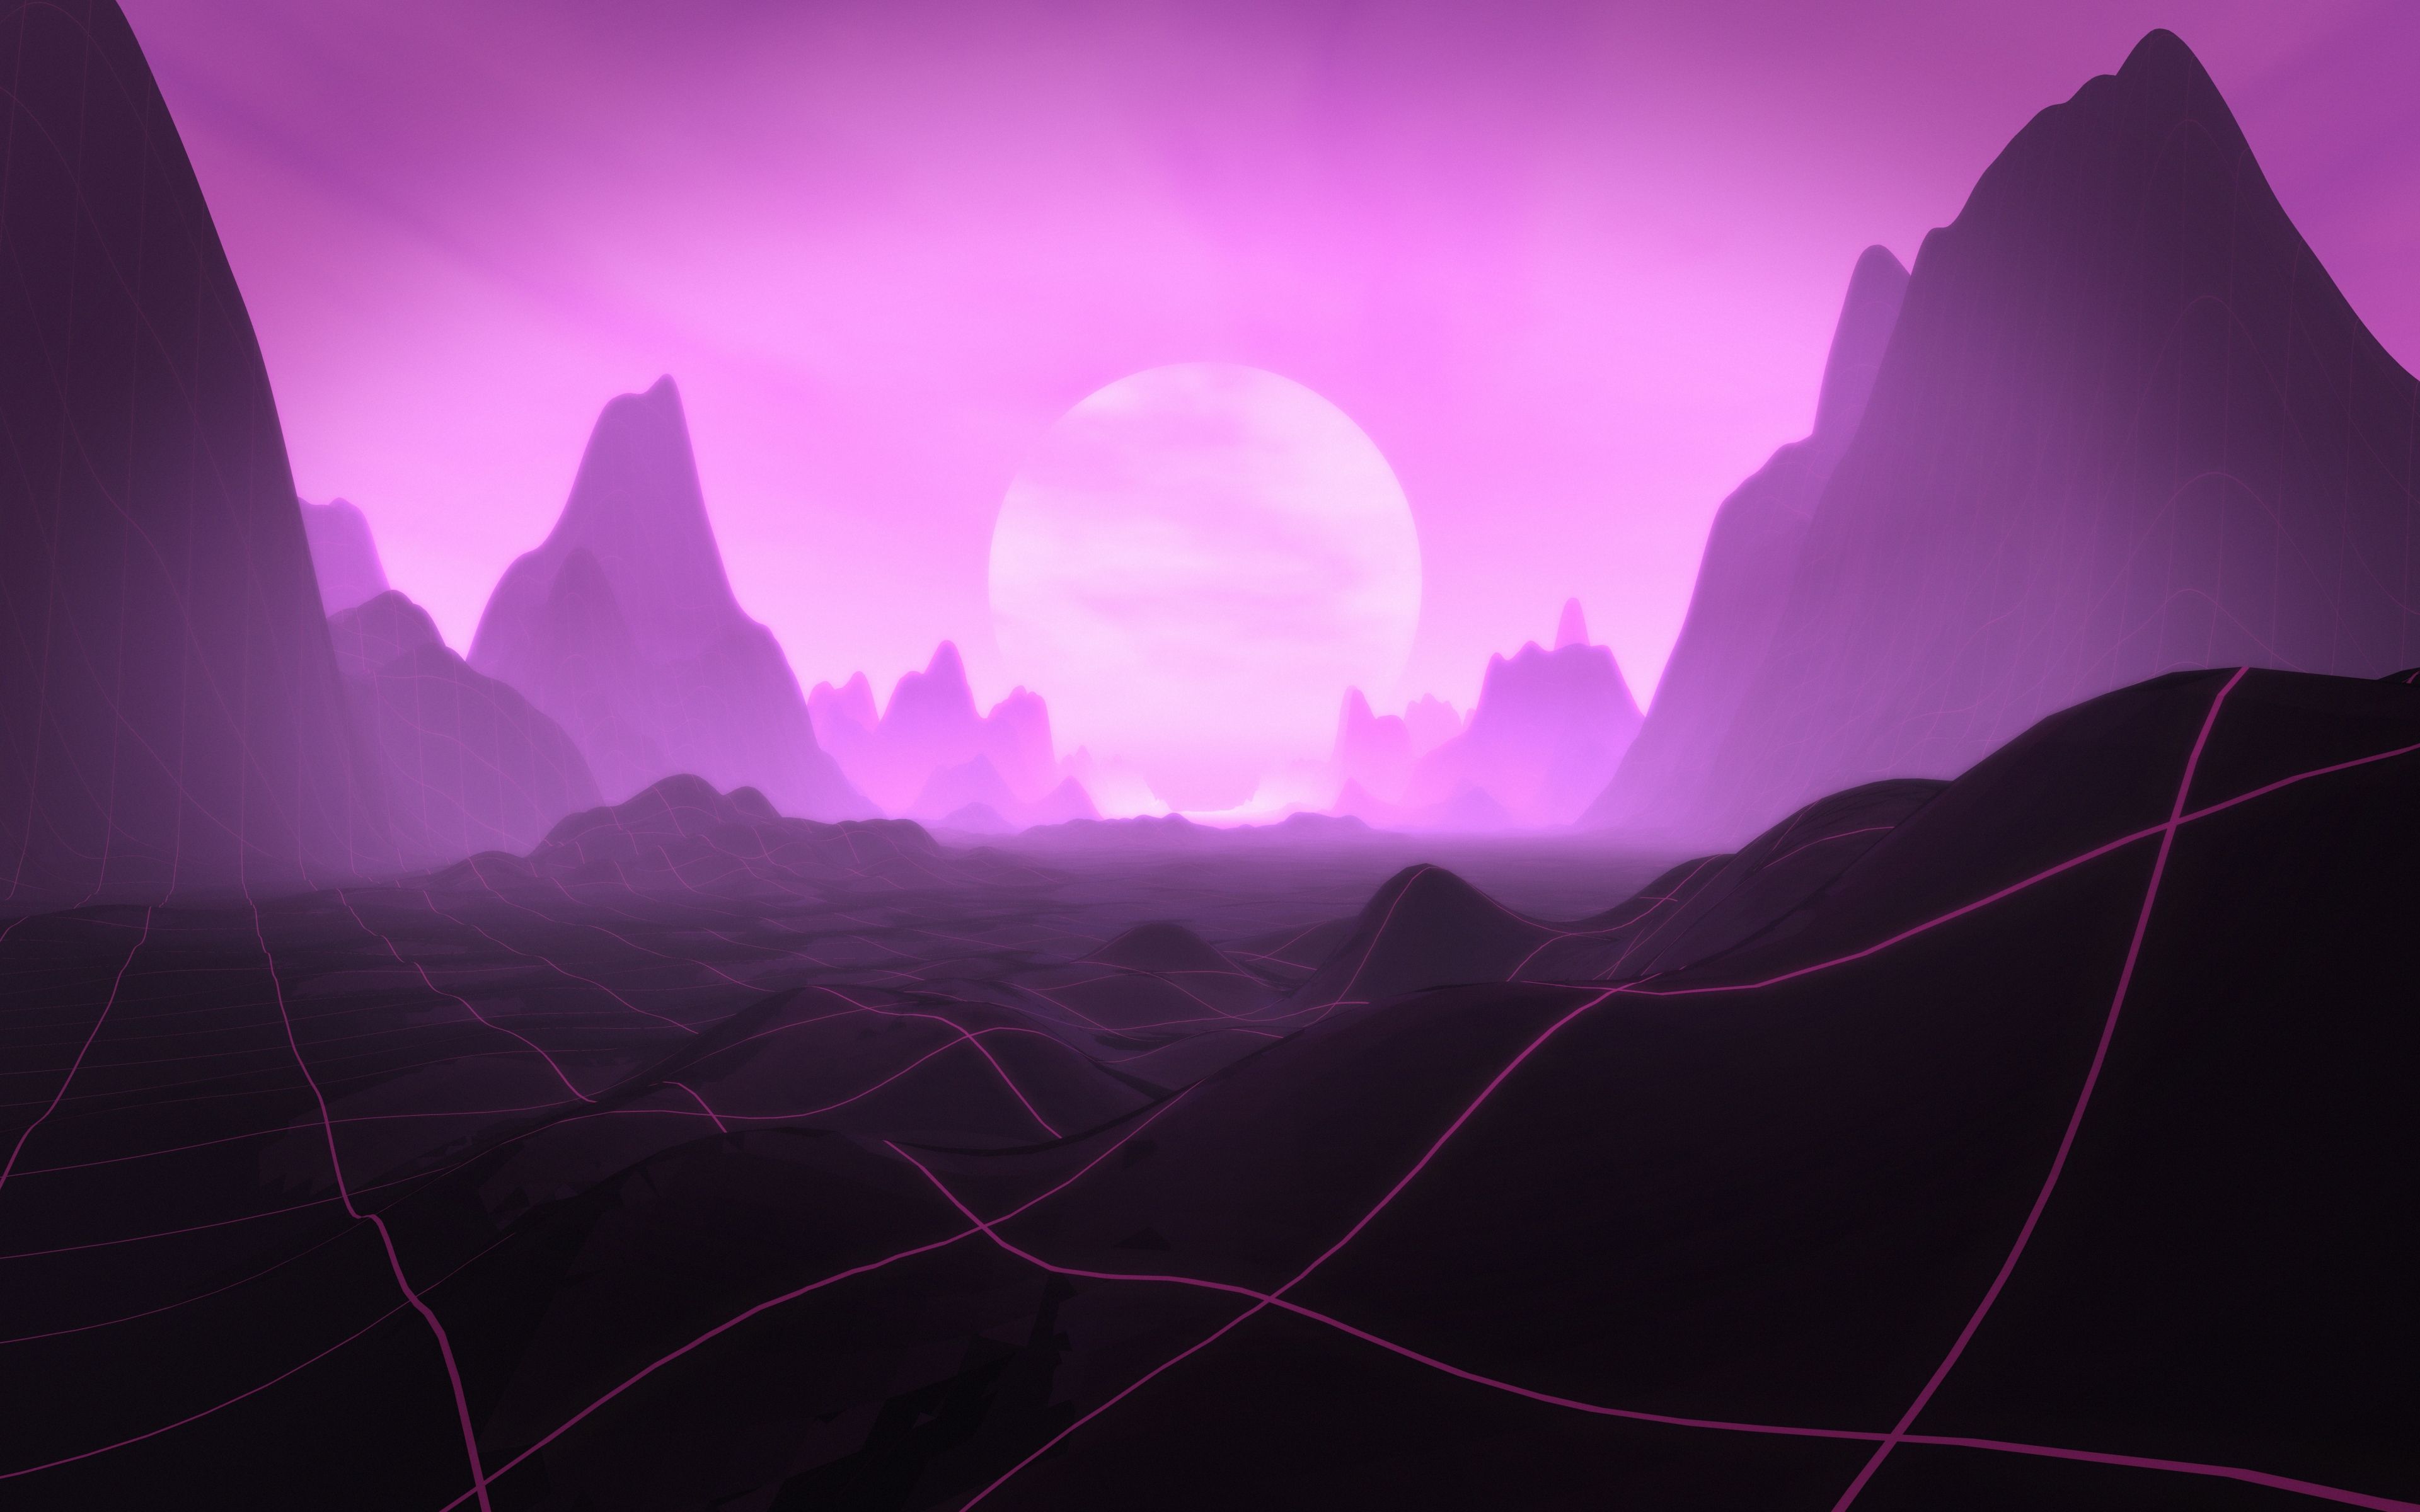 A purple and black image of a futuristic landscape with a large sun in the background. - Dark vaporwave